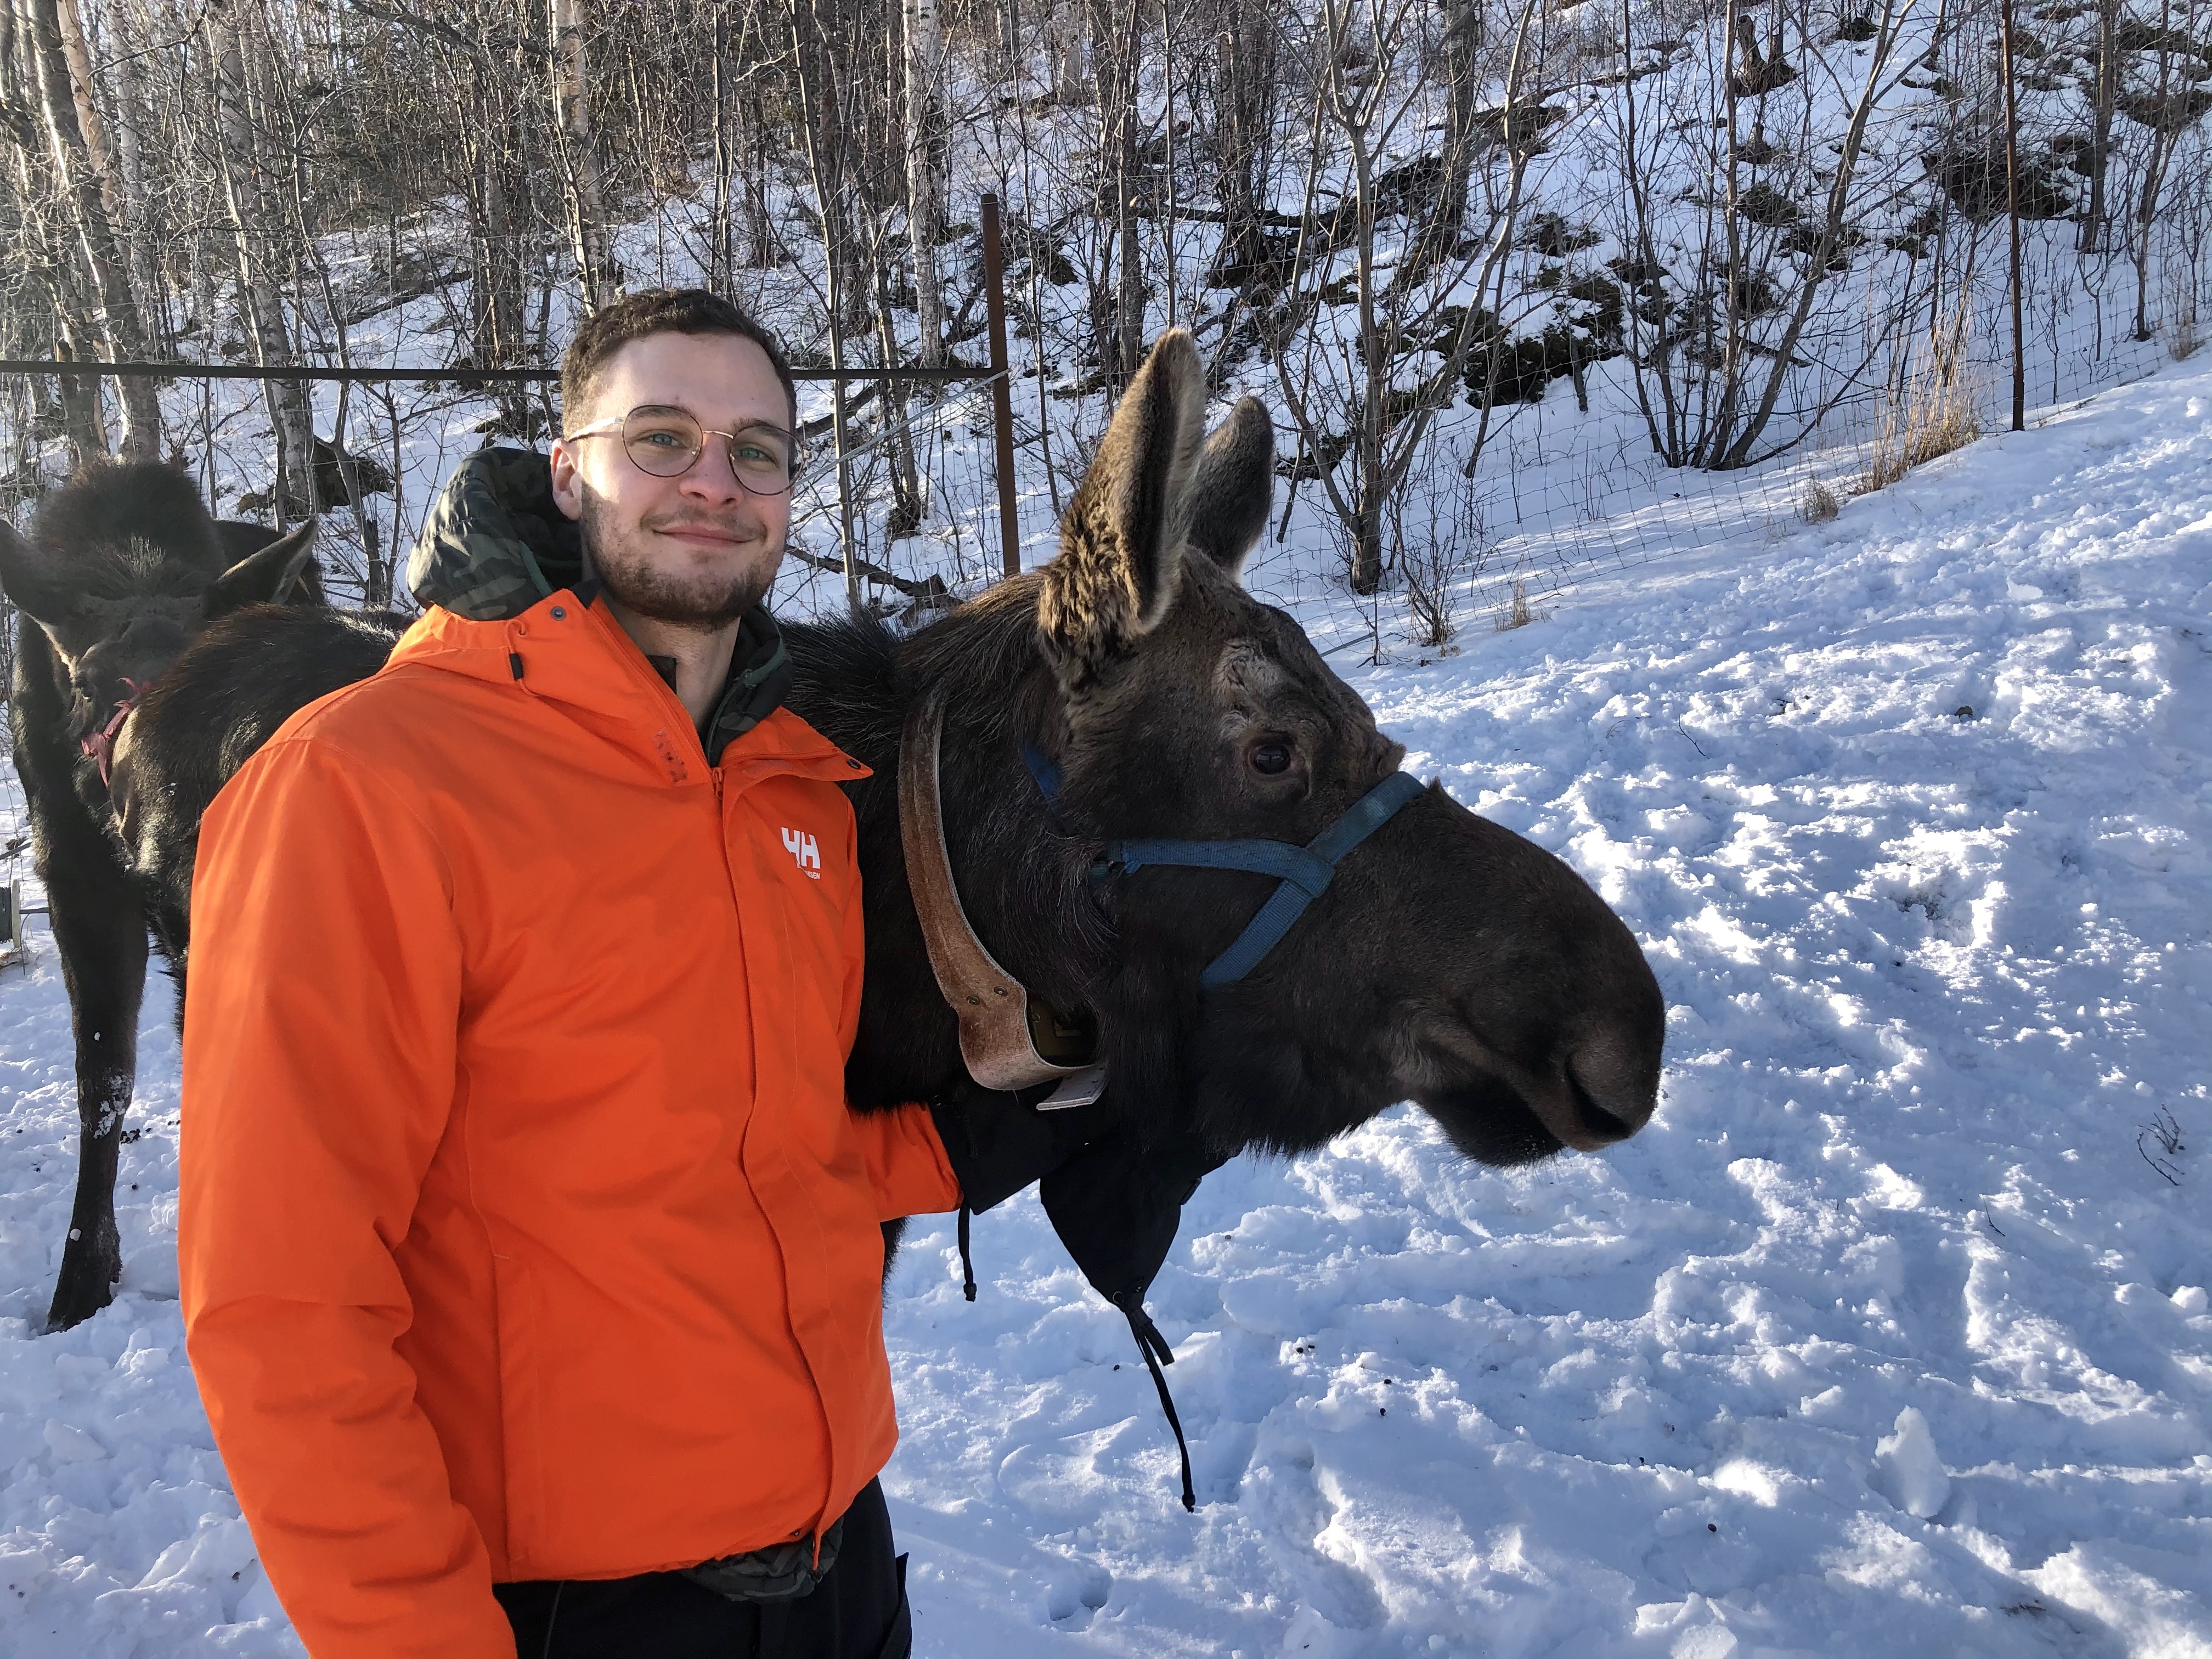 Ben Jakobek shown with a young moose